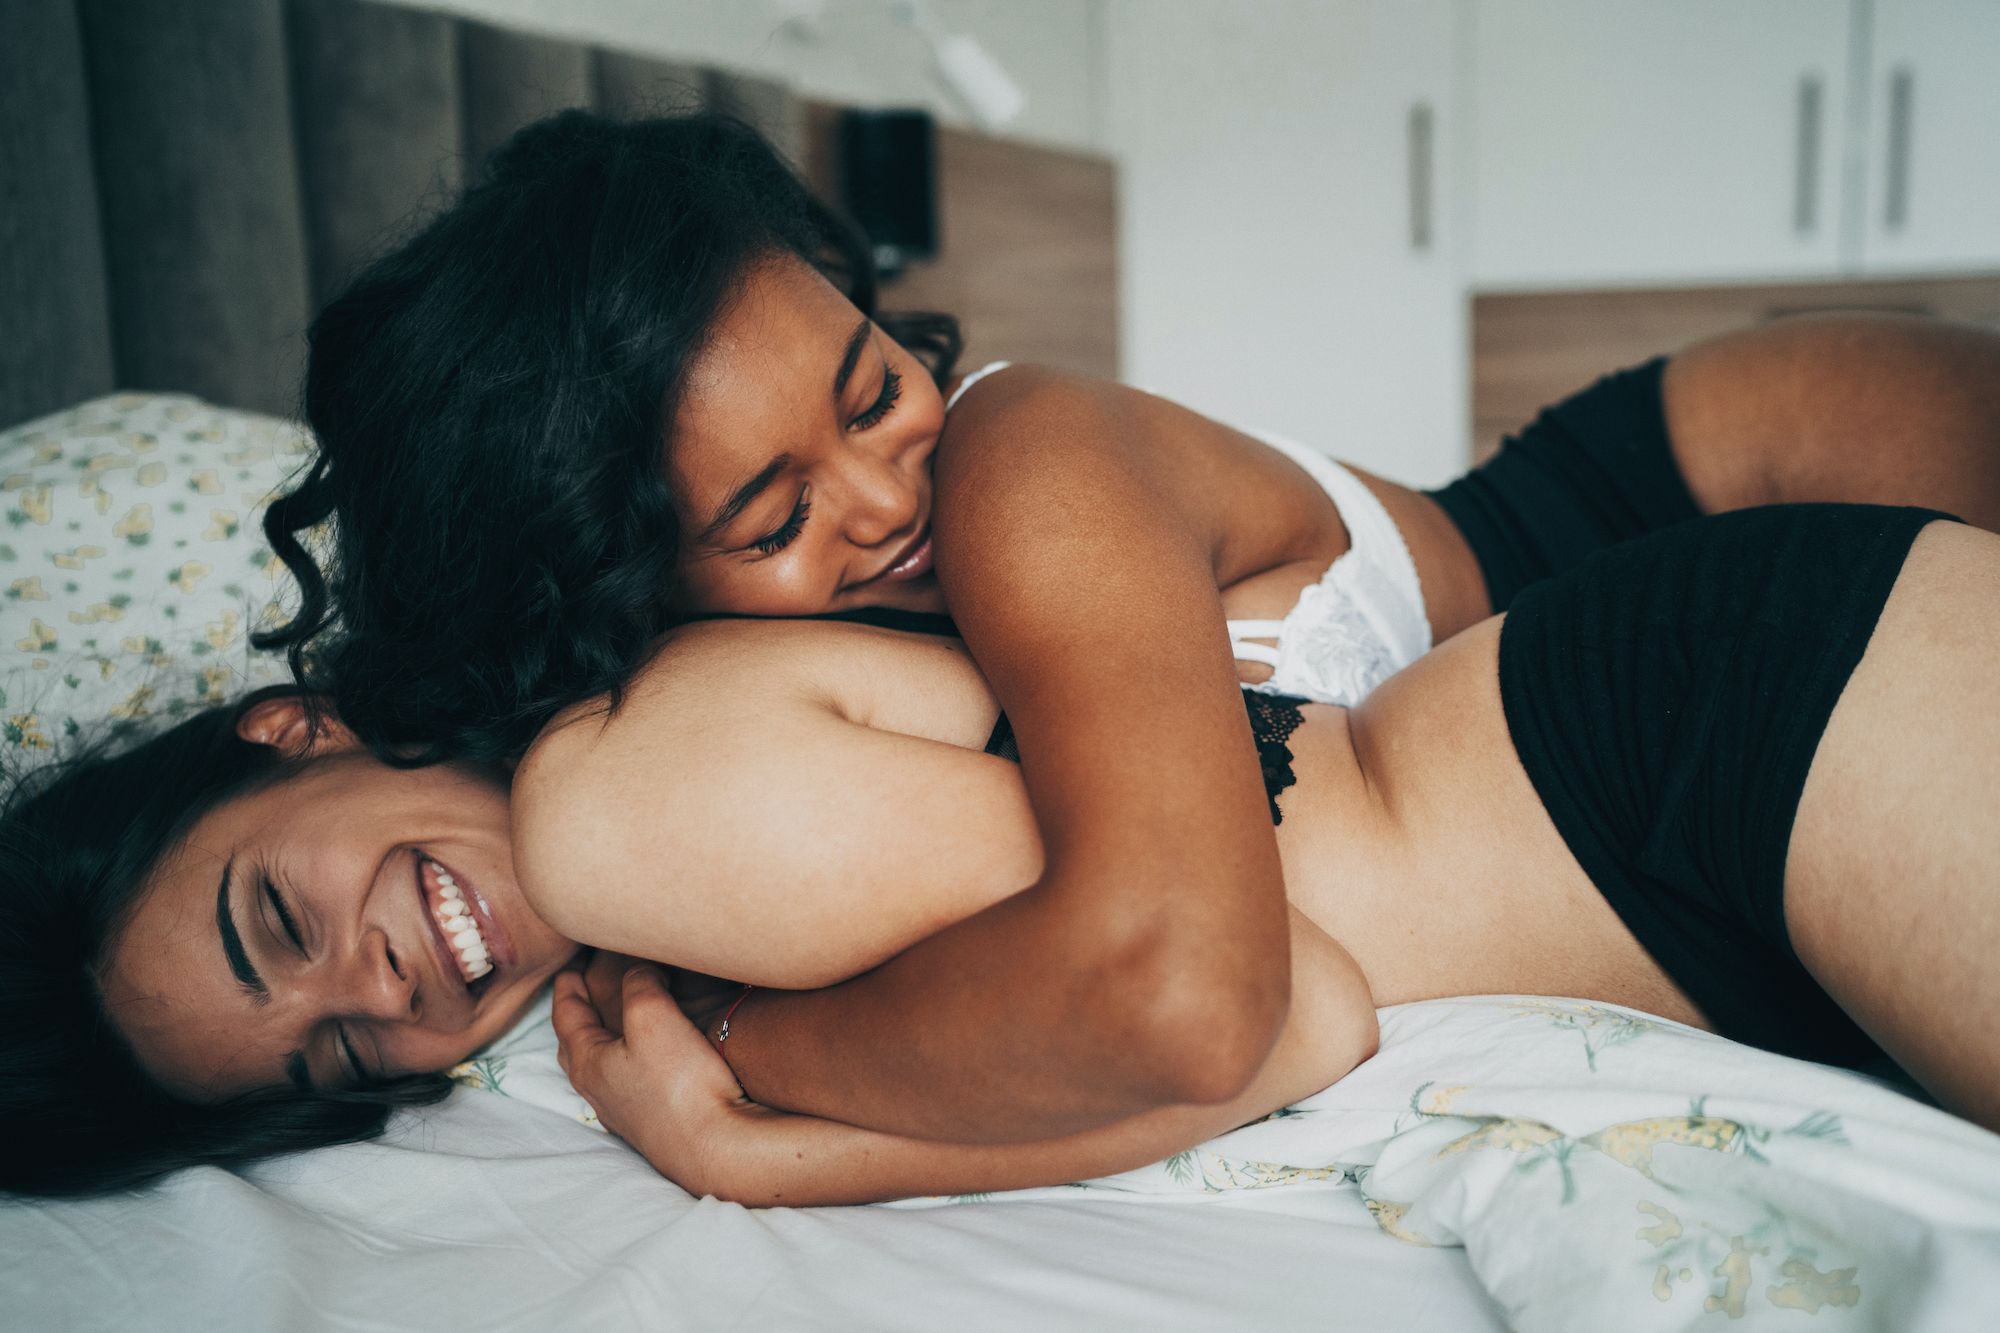 How do lesbians have sex? Myths, tips, positions, and more